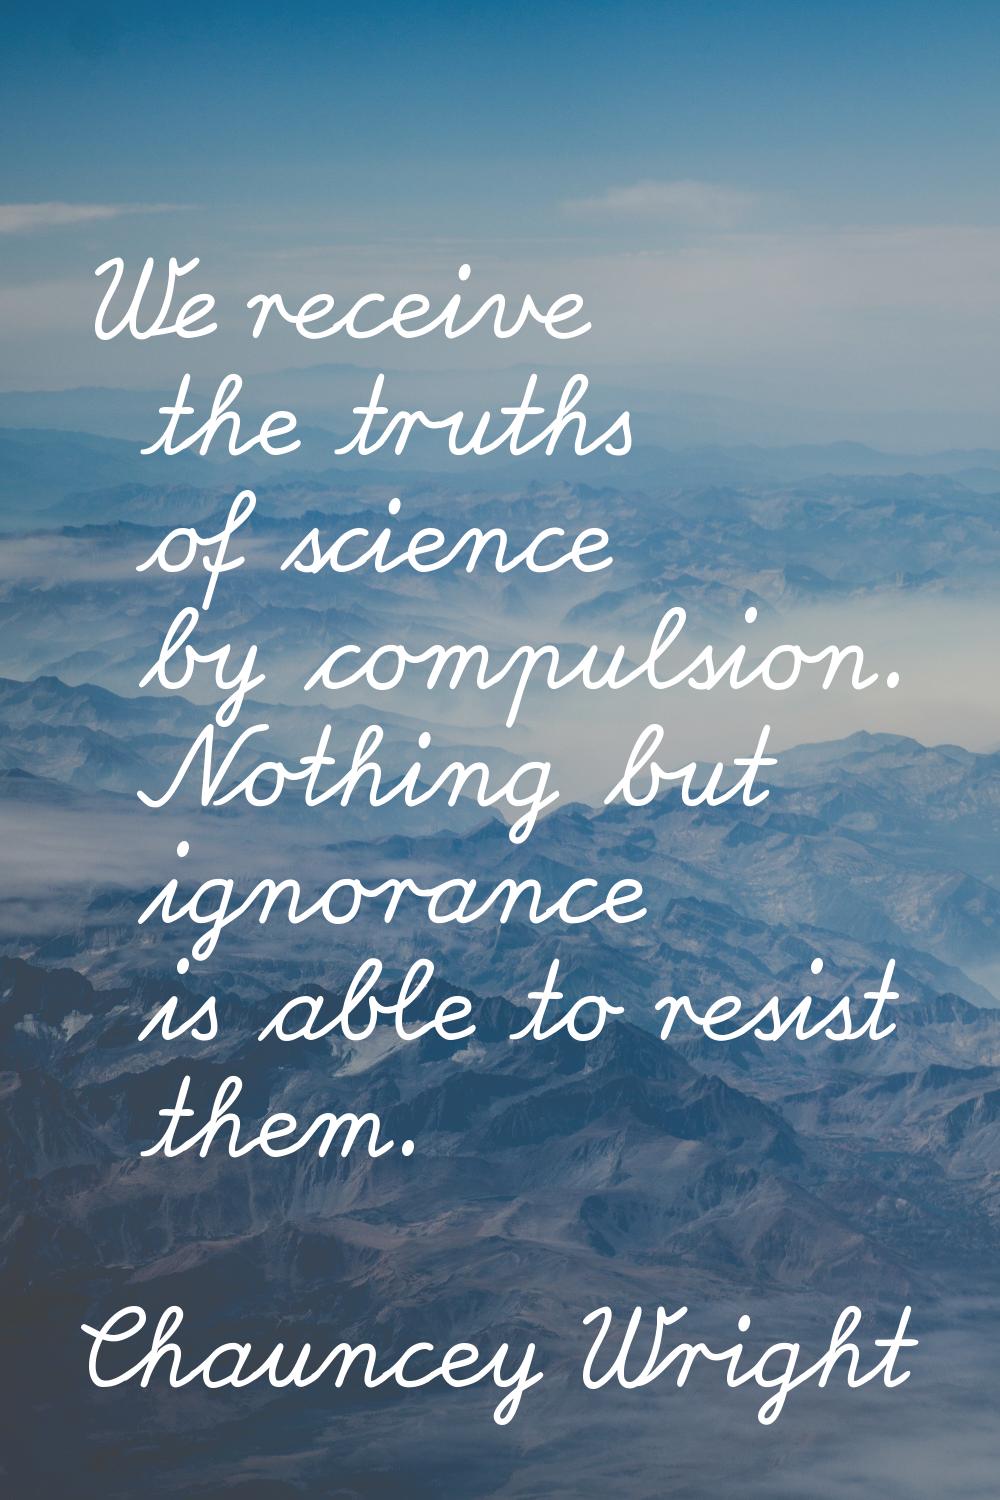 We receive the truths of science by compulsion. Nothing but ignorance is able to resist them.